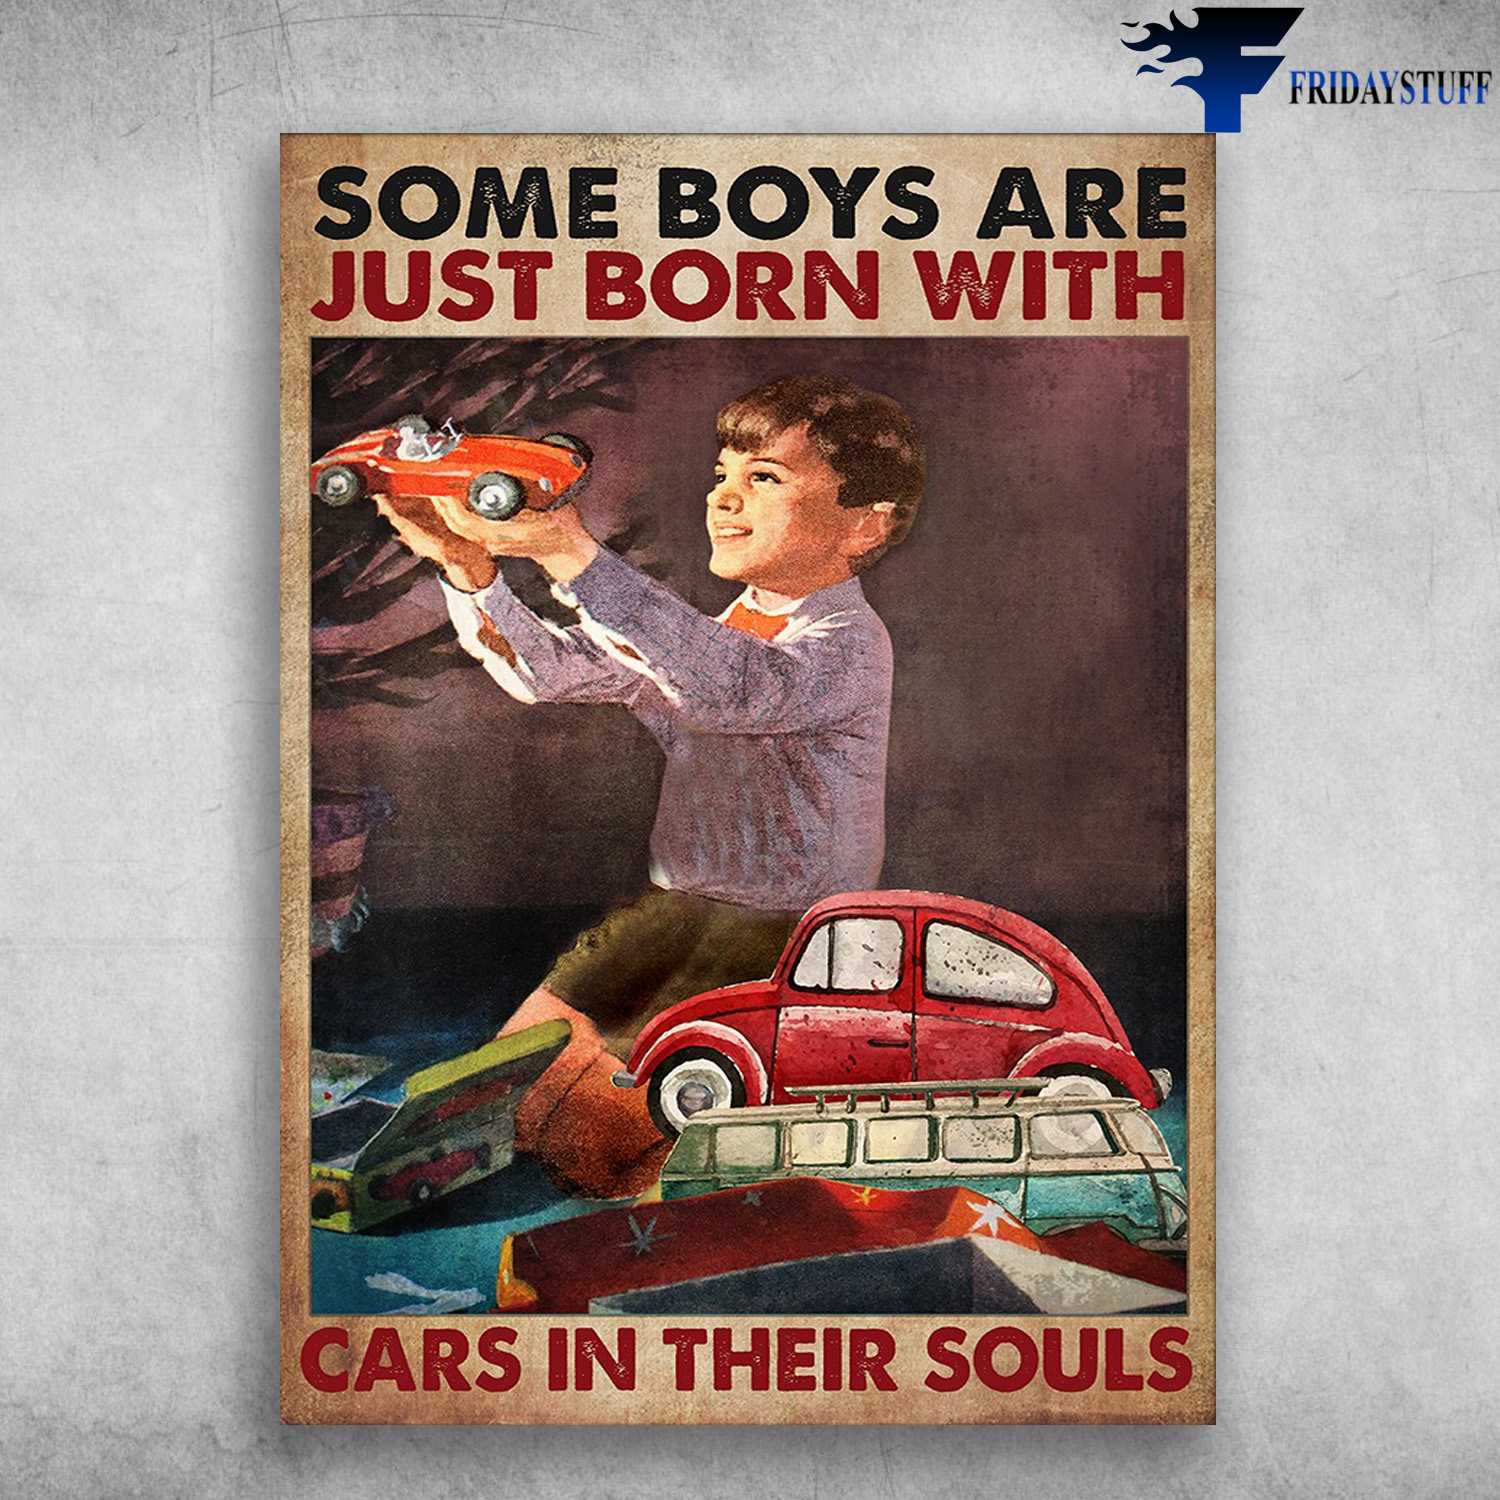 Boy Loves Car - Some Boys Are Just Born With, Cars In Their Souls